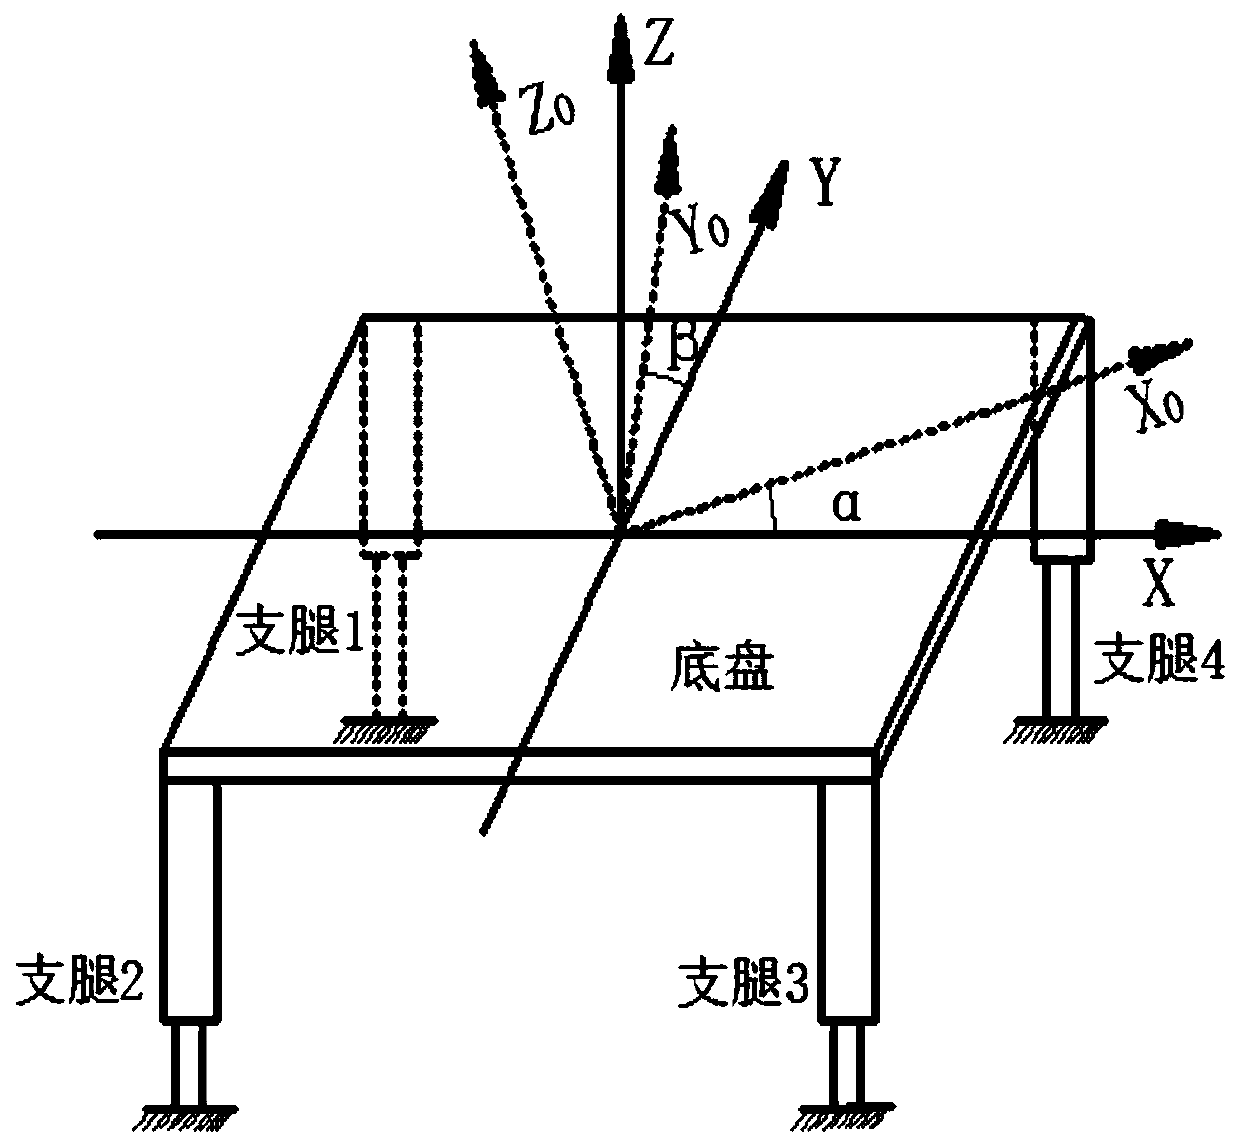 Modeling method for automatic leveling system for aerial work platform chassis